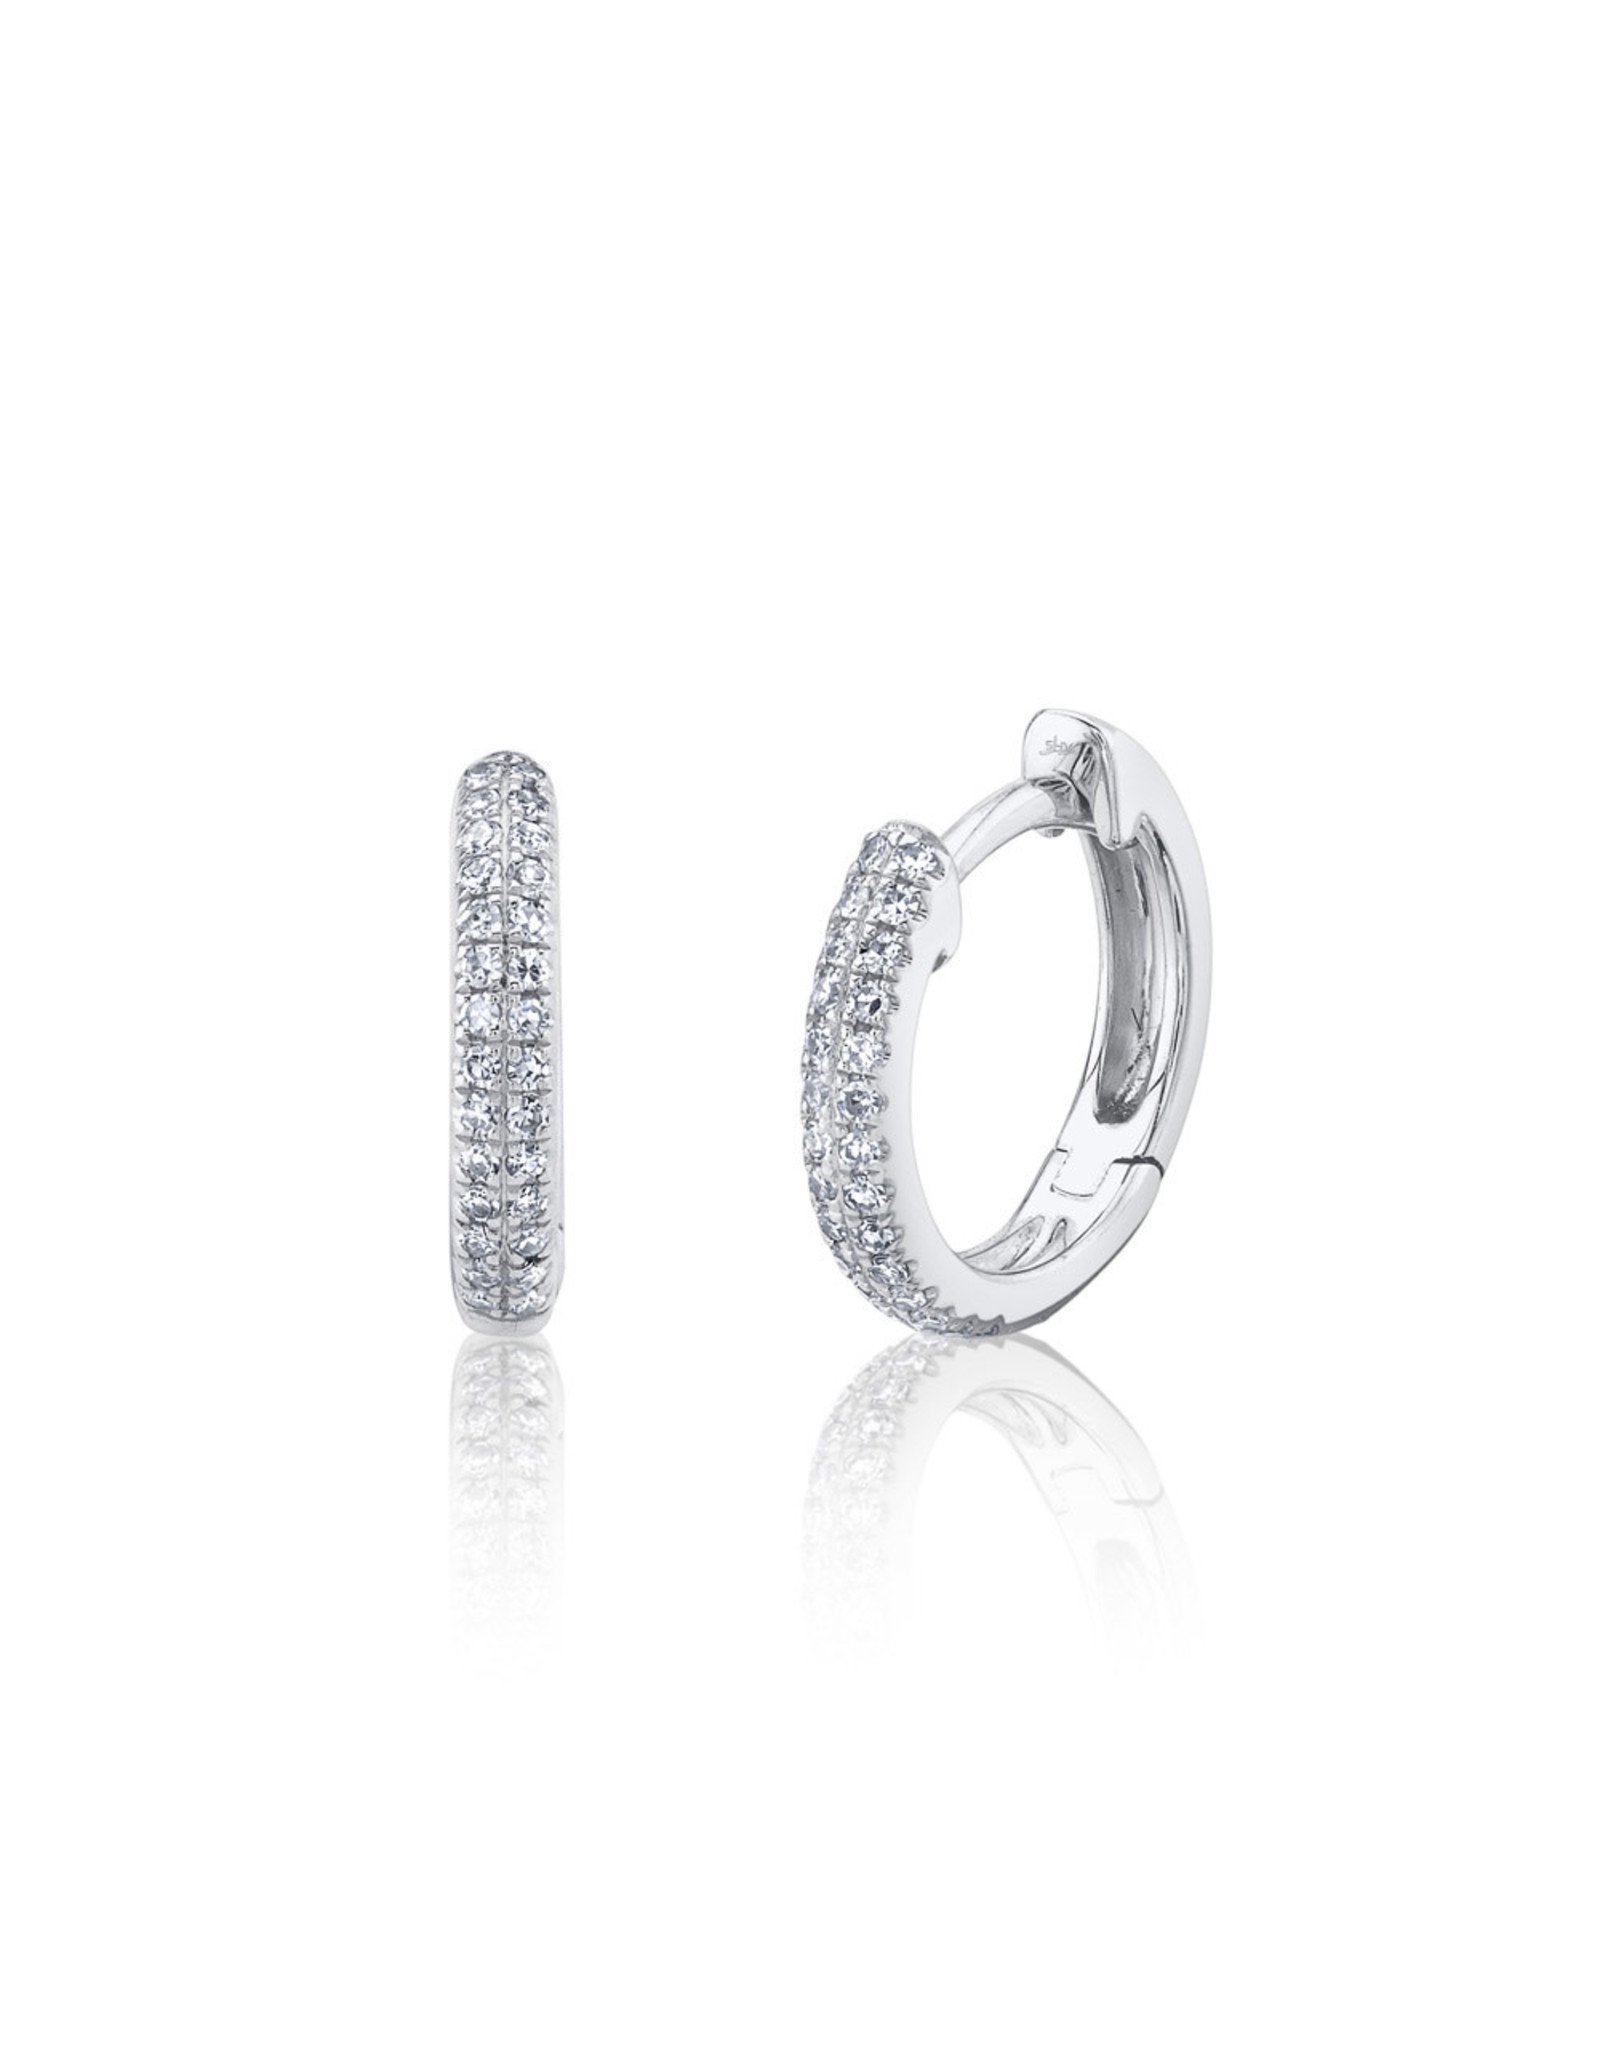 14K White Gold Essential Pave Diamond Huggie Earrings, D: 0.20ct